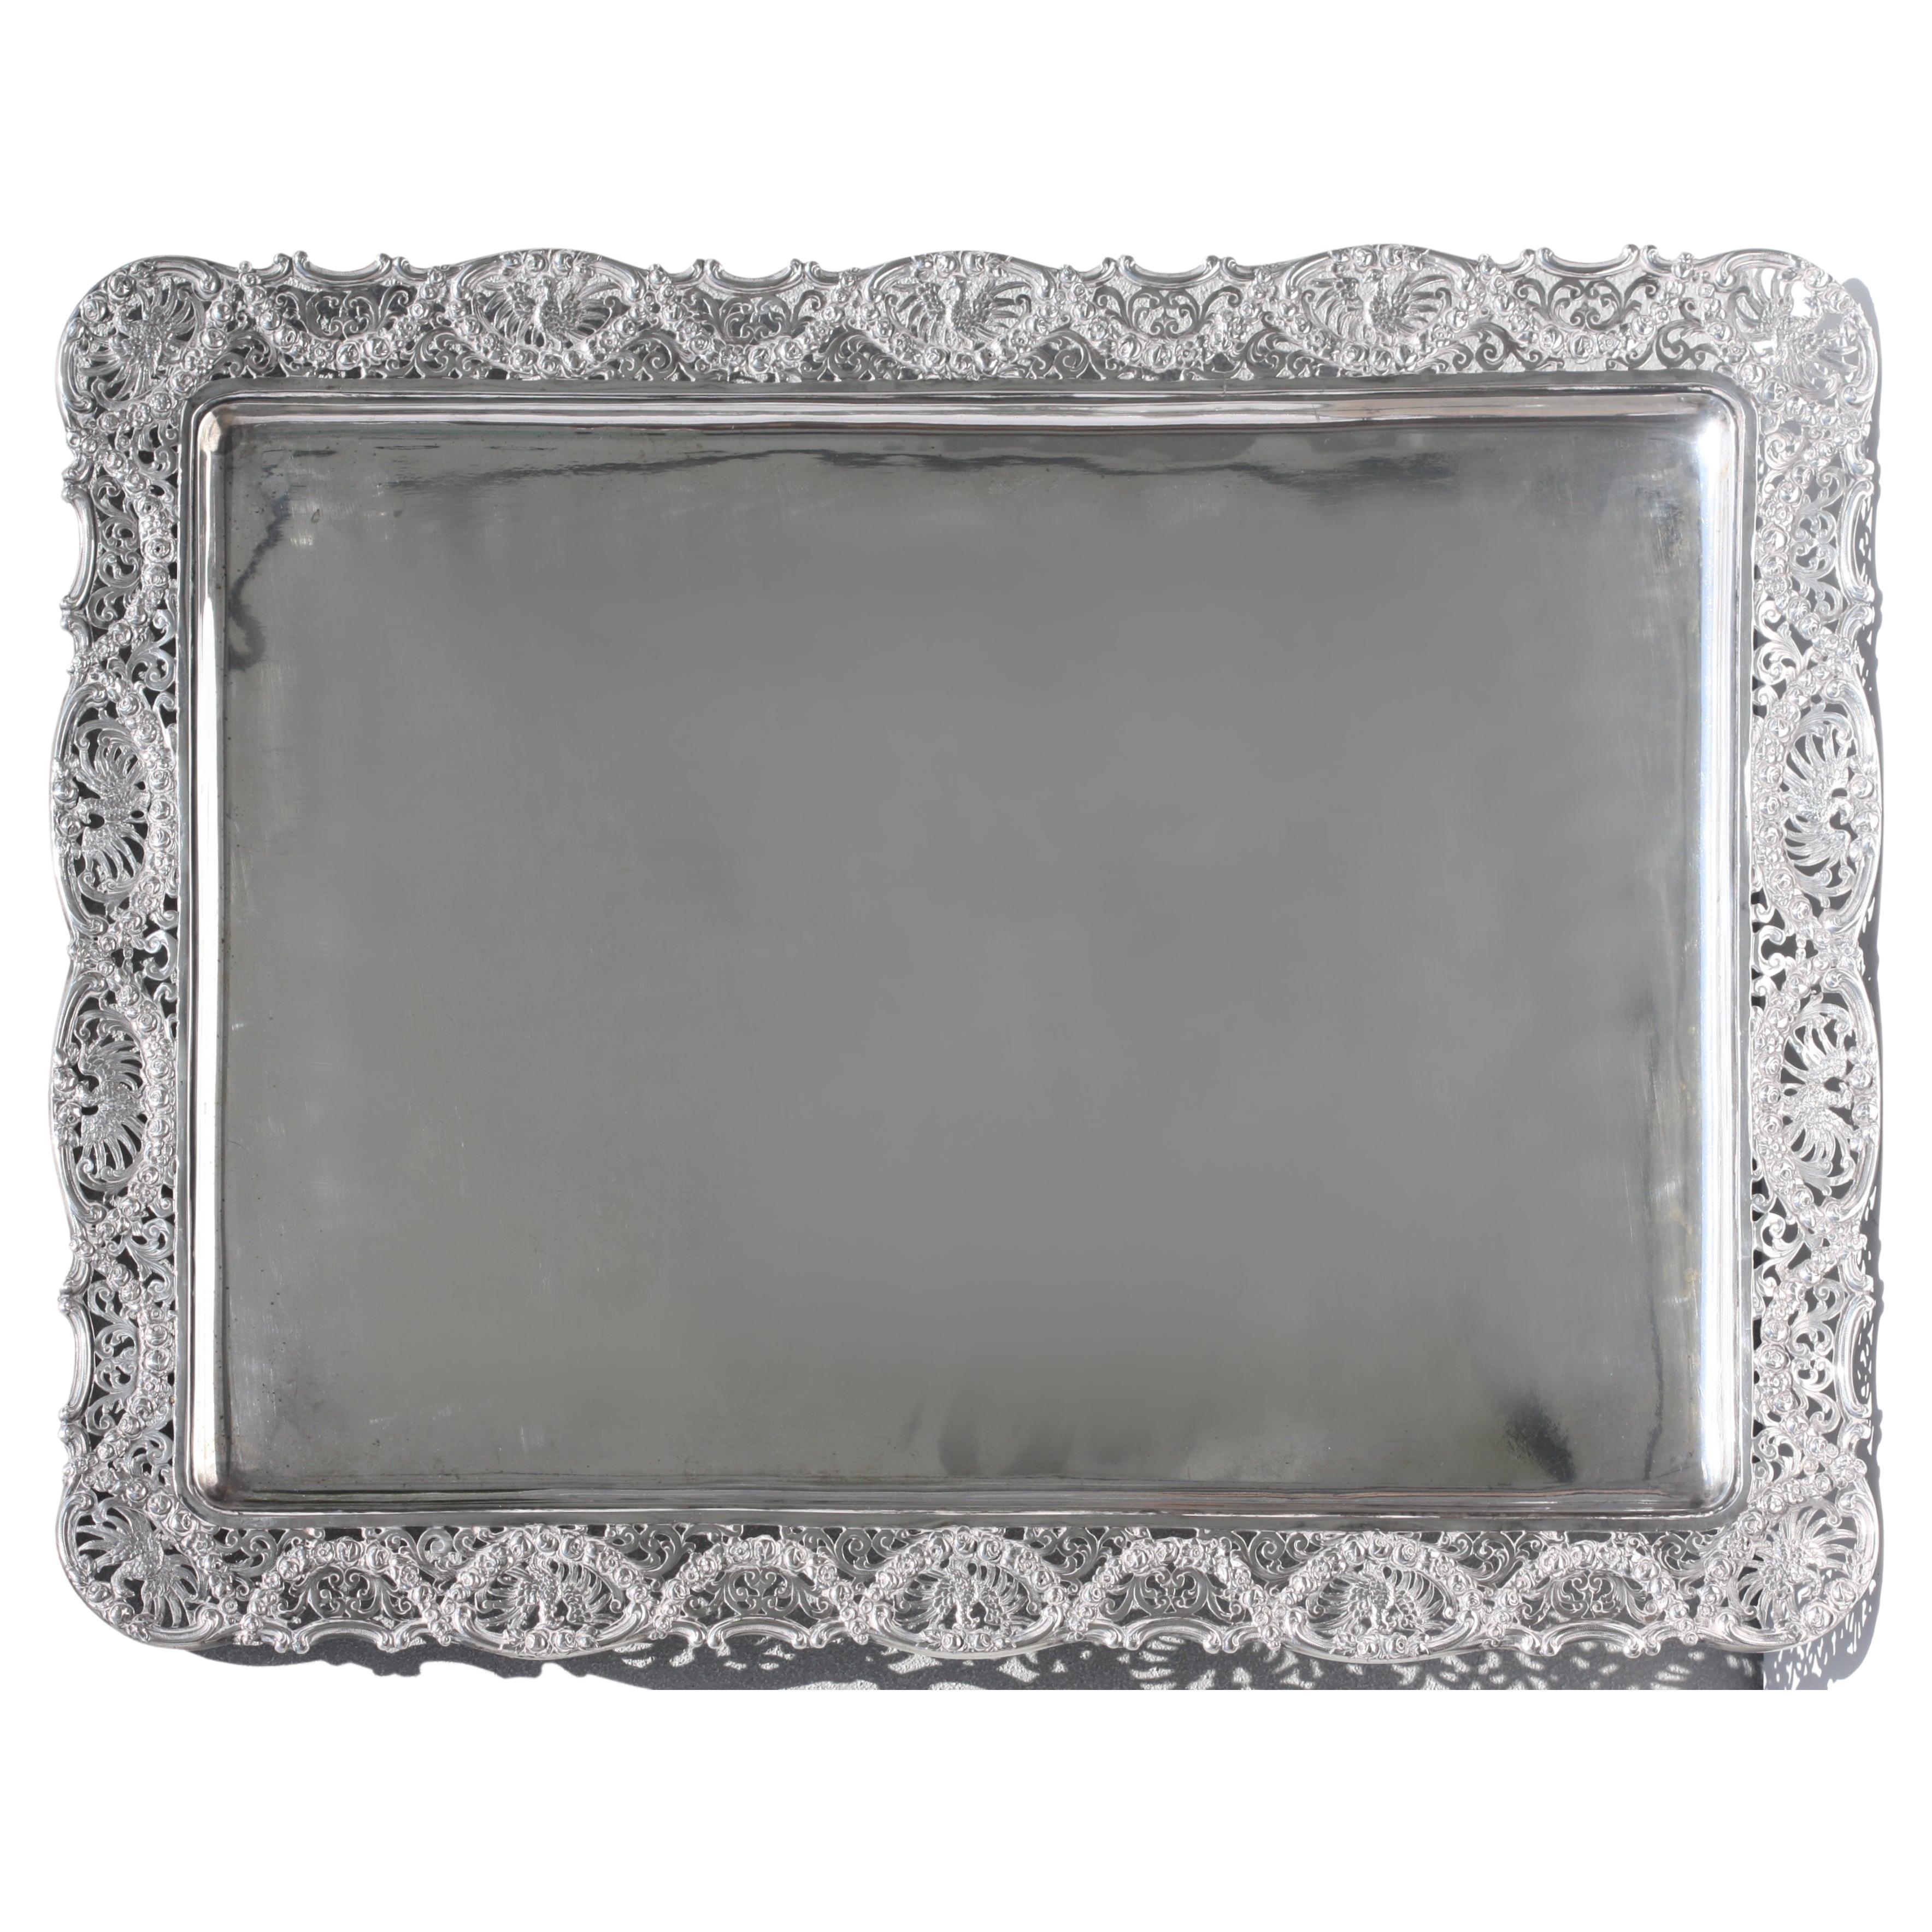 Continental Silver Rectangular Tray, Probably German For Sale